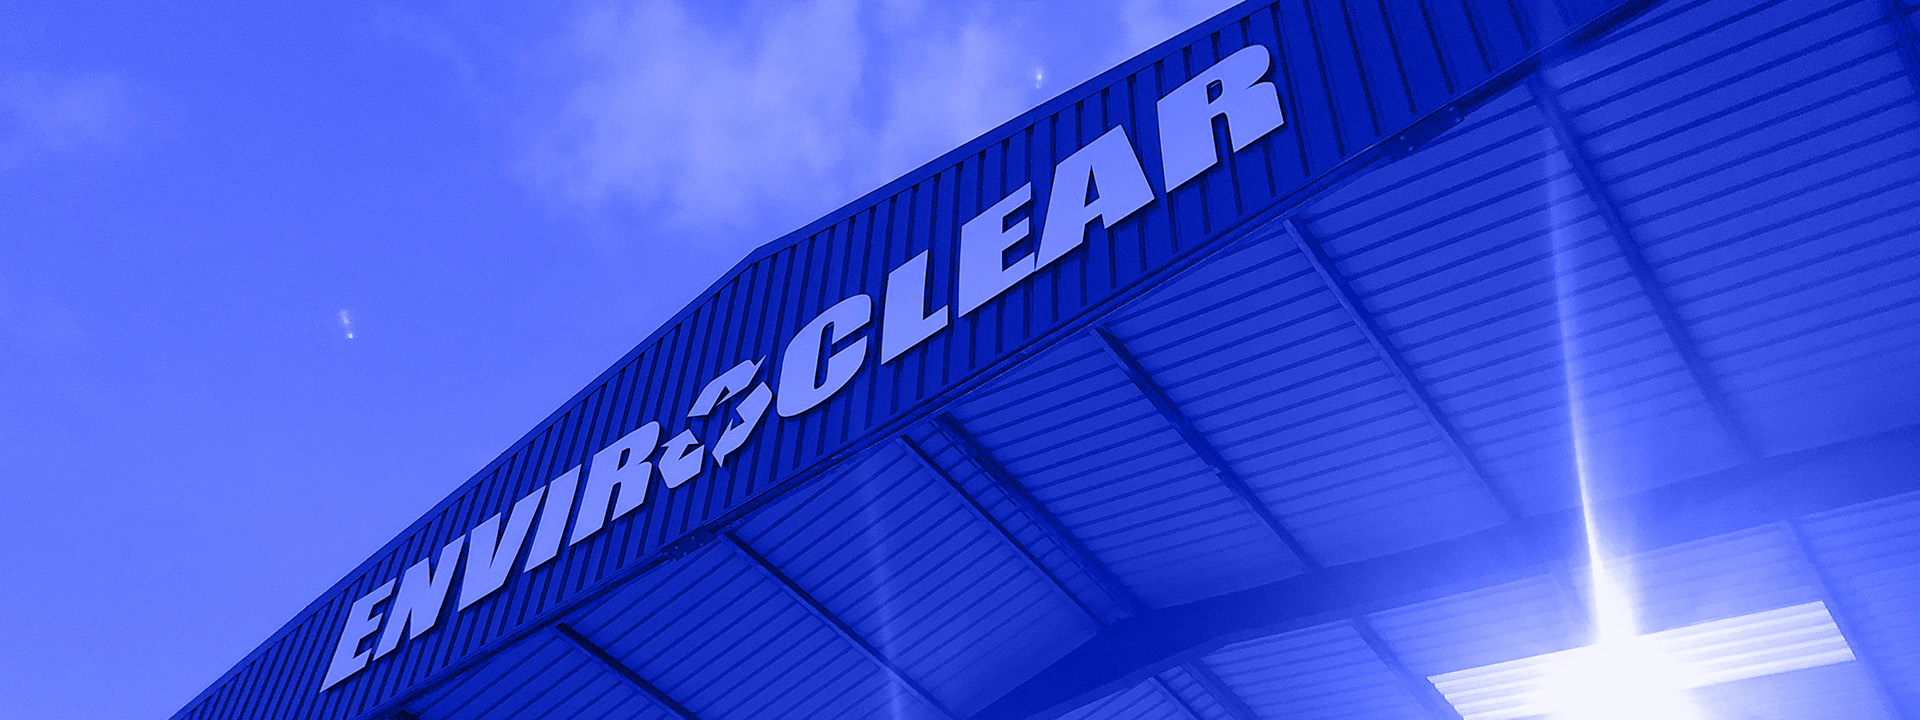 EnviroClear Waste - Waste Disposal, Recycling, Waste Removal and Woodchip, Soil, Concrete, Recycling Centre in Kent, London